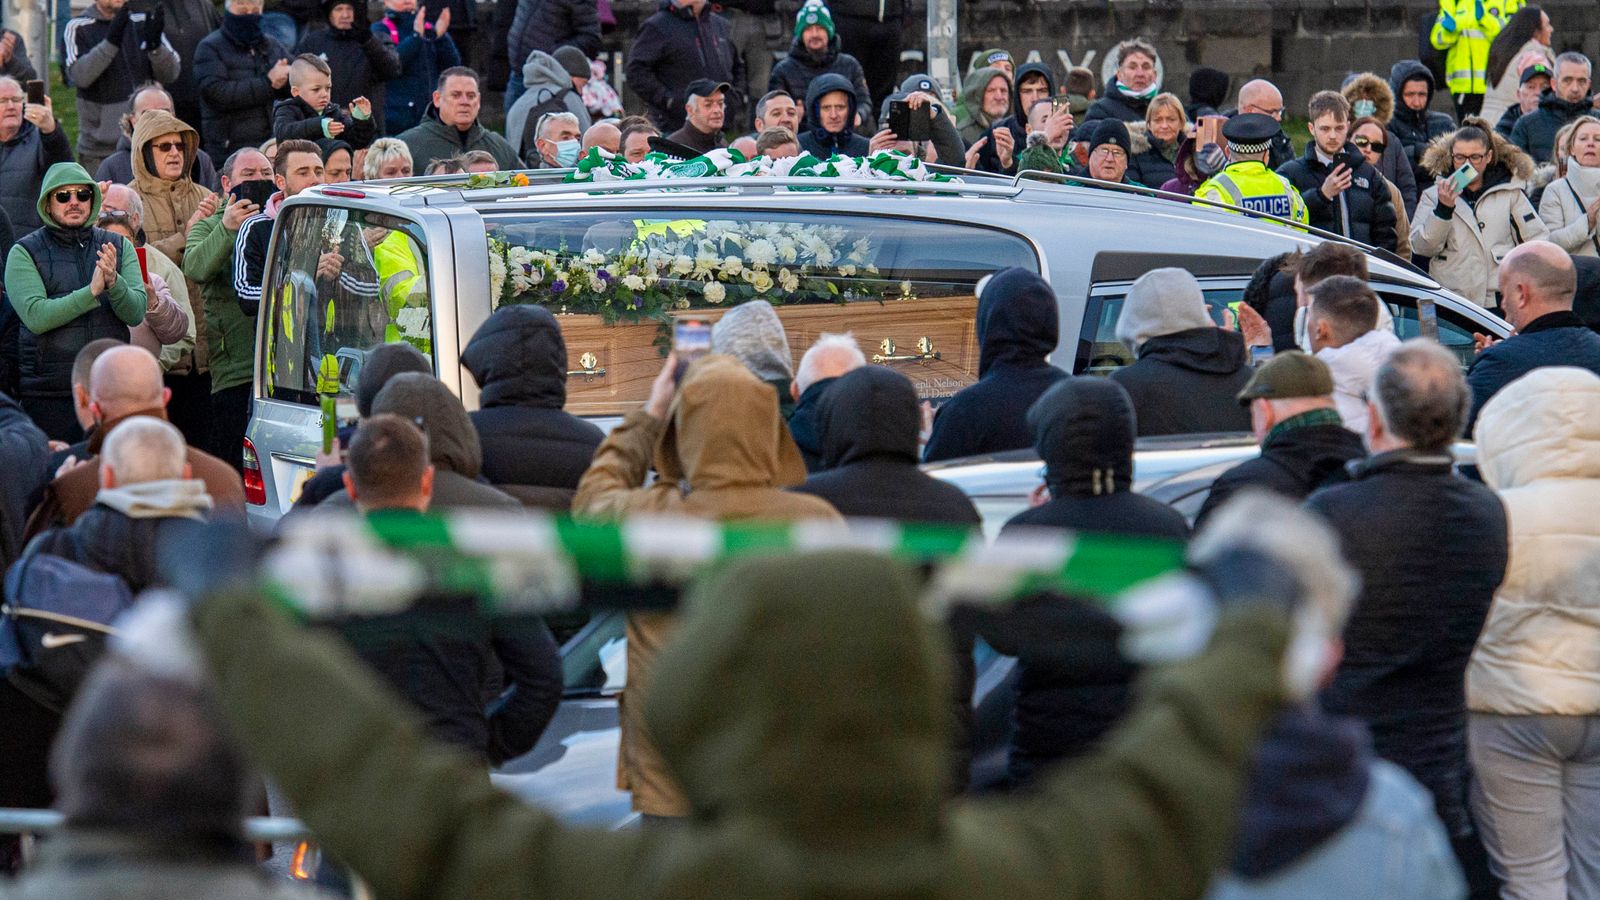 Bertie Auld hailed as one of Celtic's 'greatest ambassadors' at final farewell